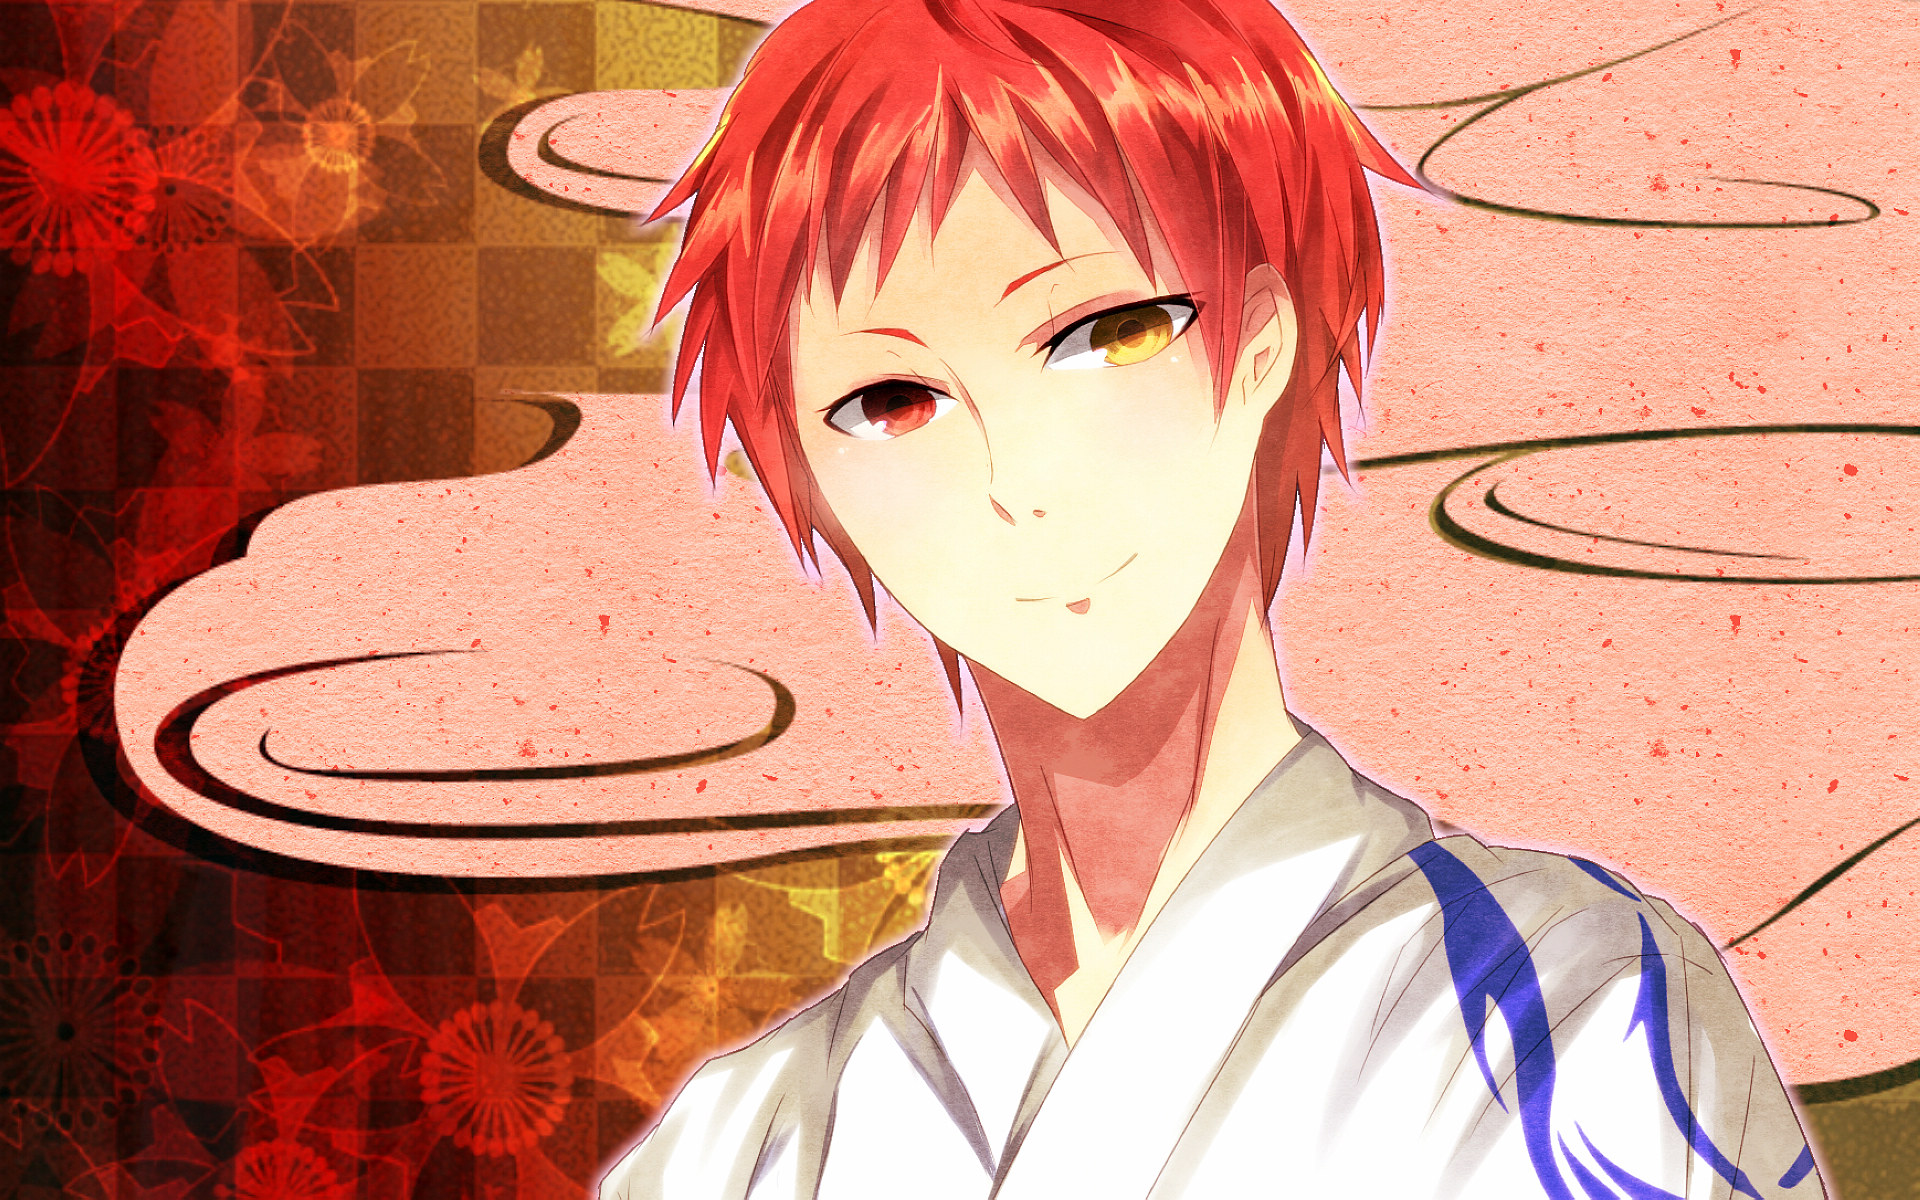 Anime Boy Red Hair Wallpapers